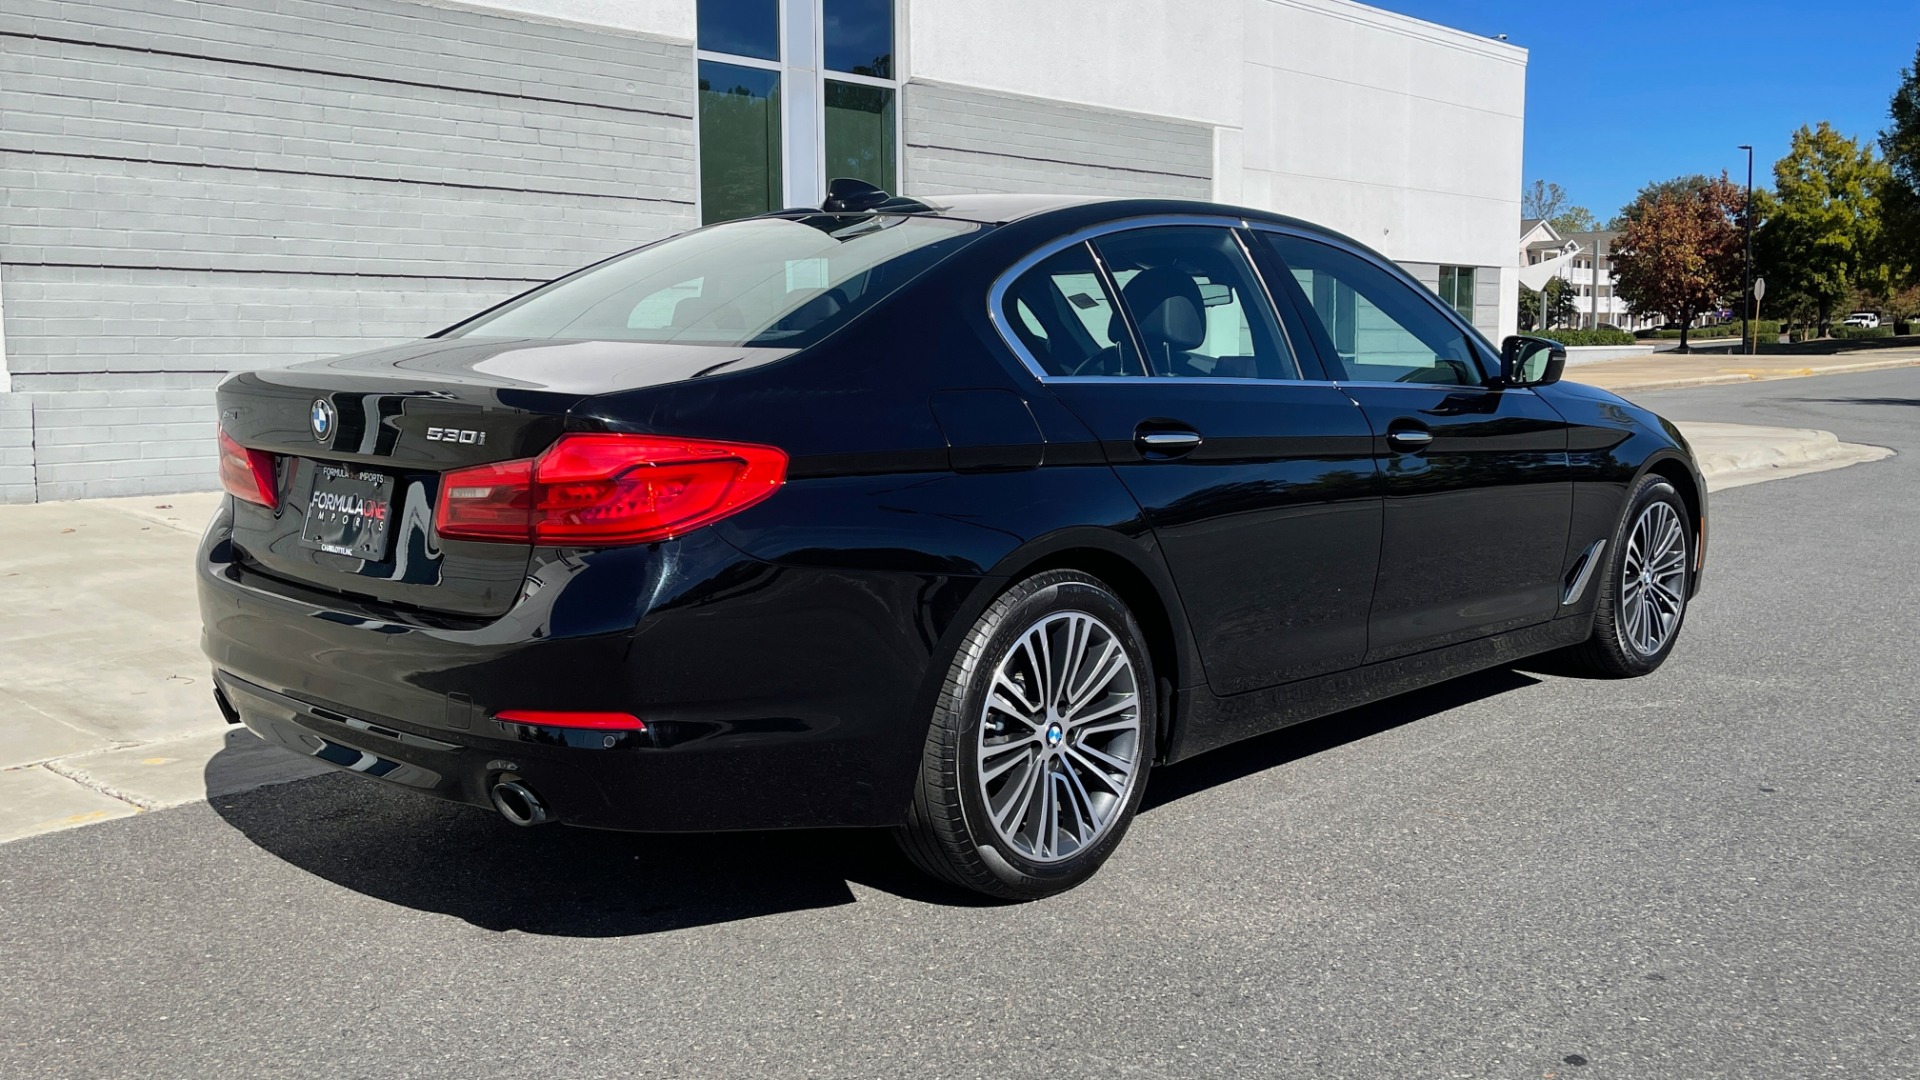 Used 2018 BMW 5 SERIES 530I XDRIVE 2.0L / 8-SPD AUTO / NAV / SUNROOF / REARVIEW for sale Sold at Formula Imports in Charlotte NC 28227 6